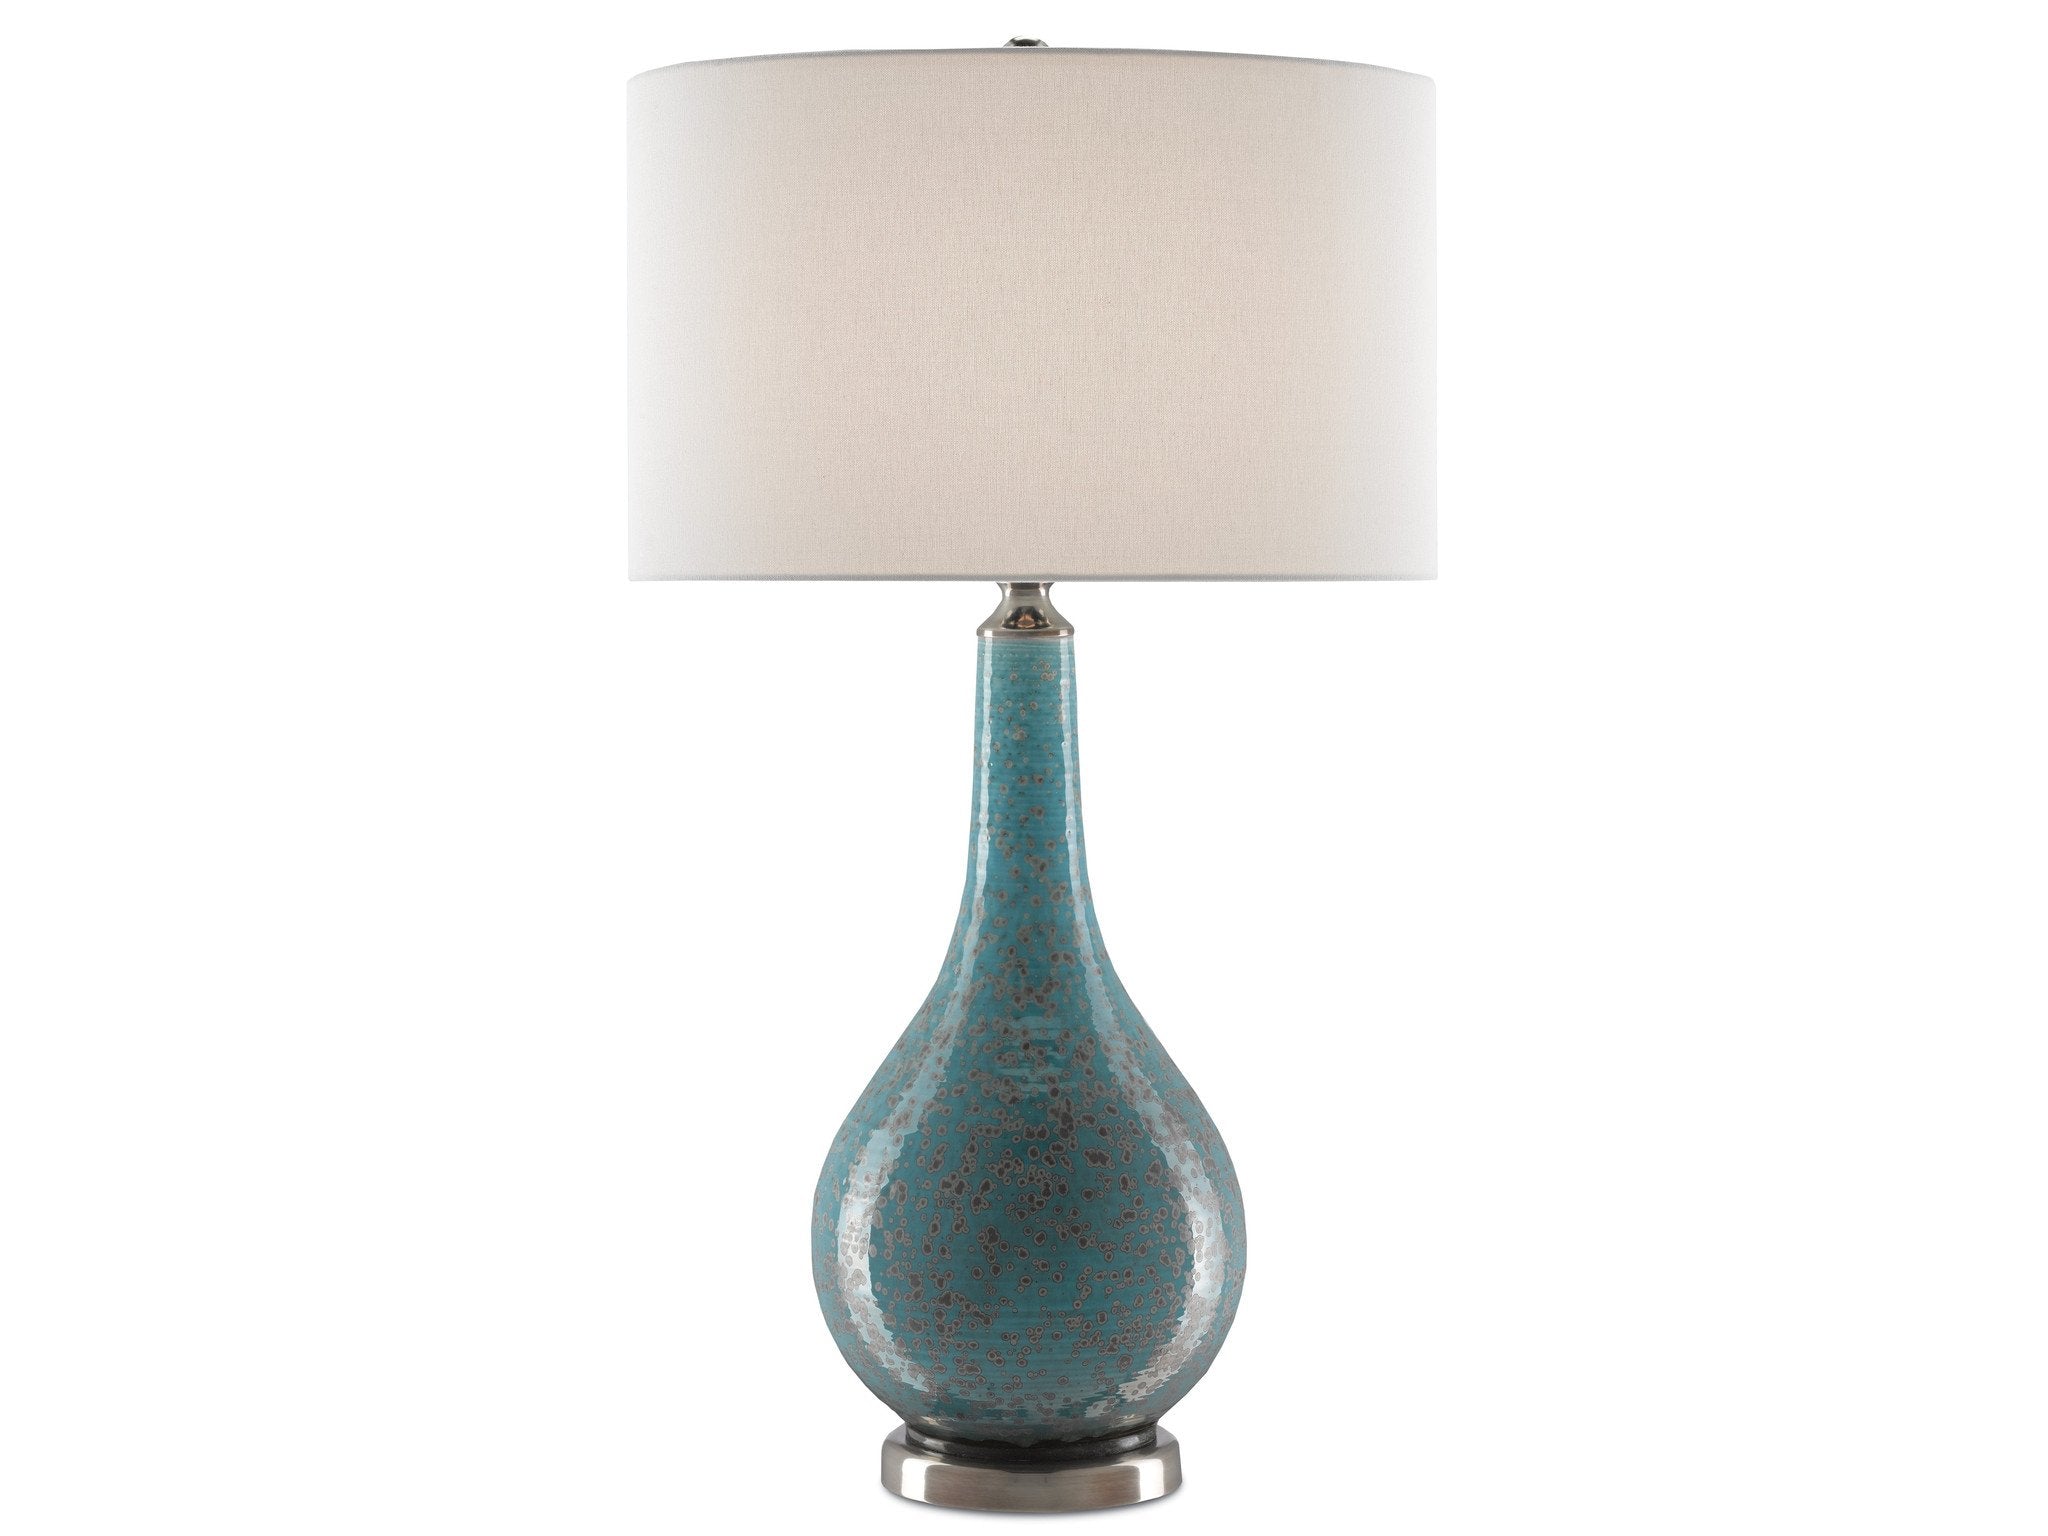 Antiqua Table Lamp in Turquoise design by Currey and Company